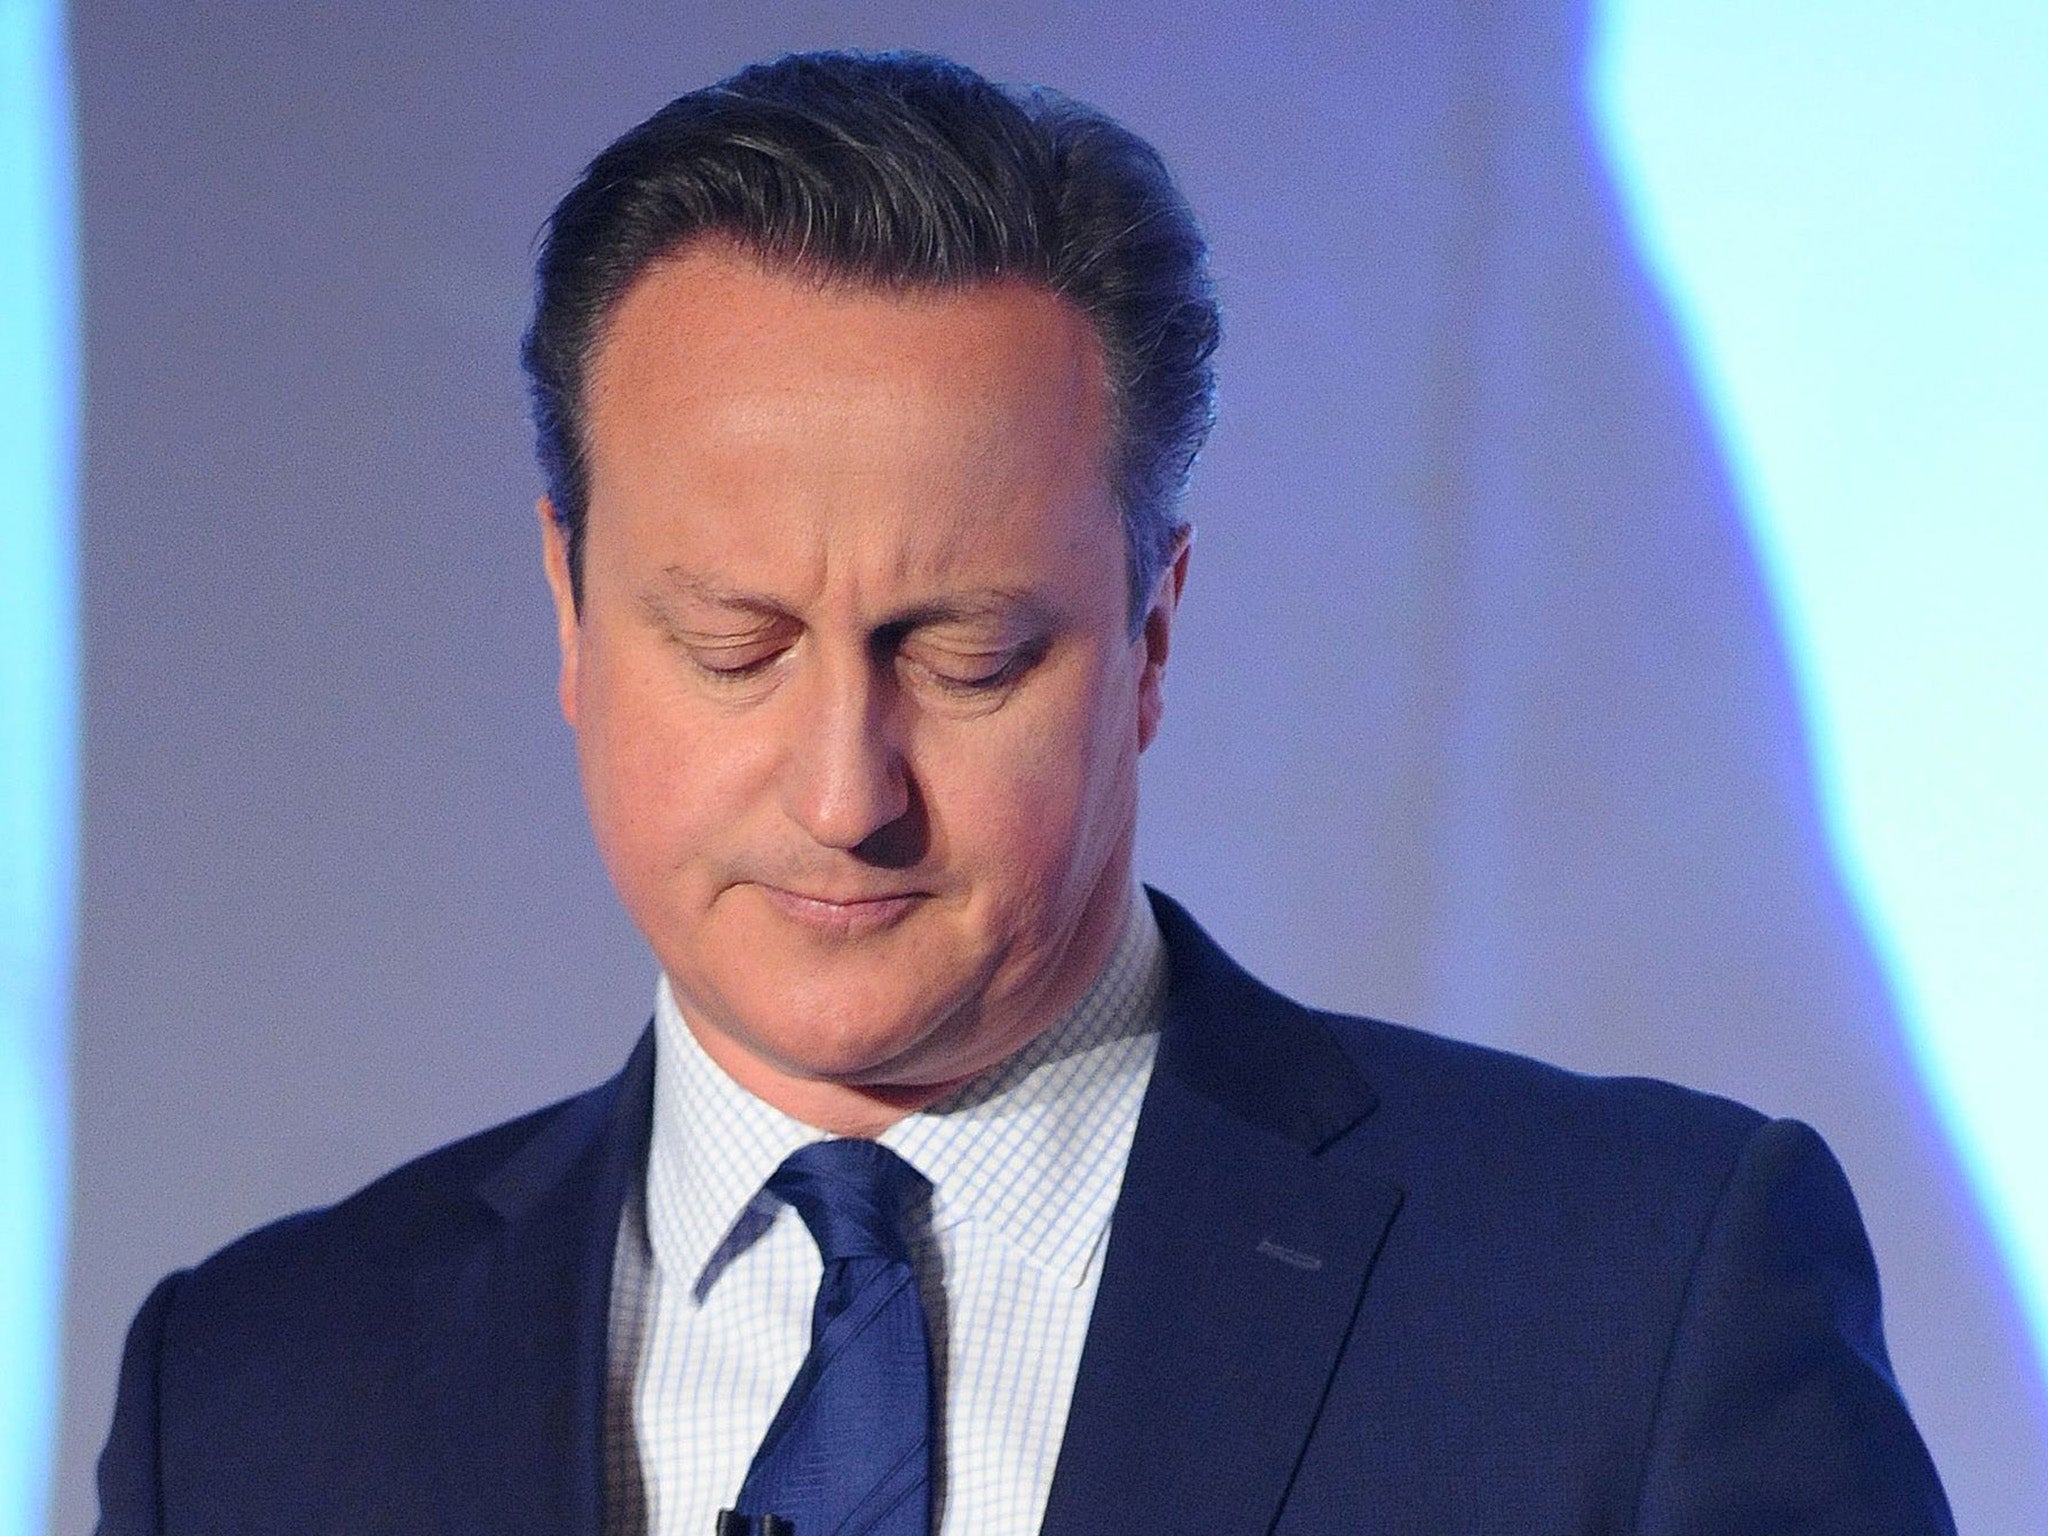 Mr Cameron said academies could be improved faster than council-run schools